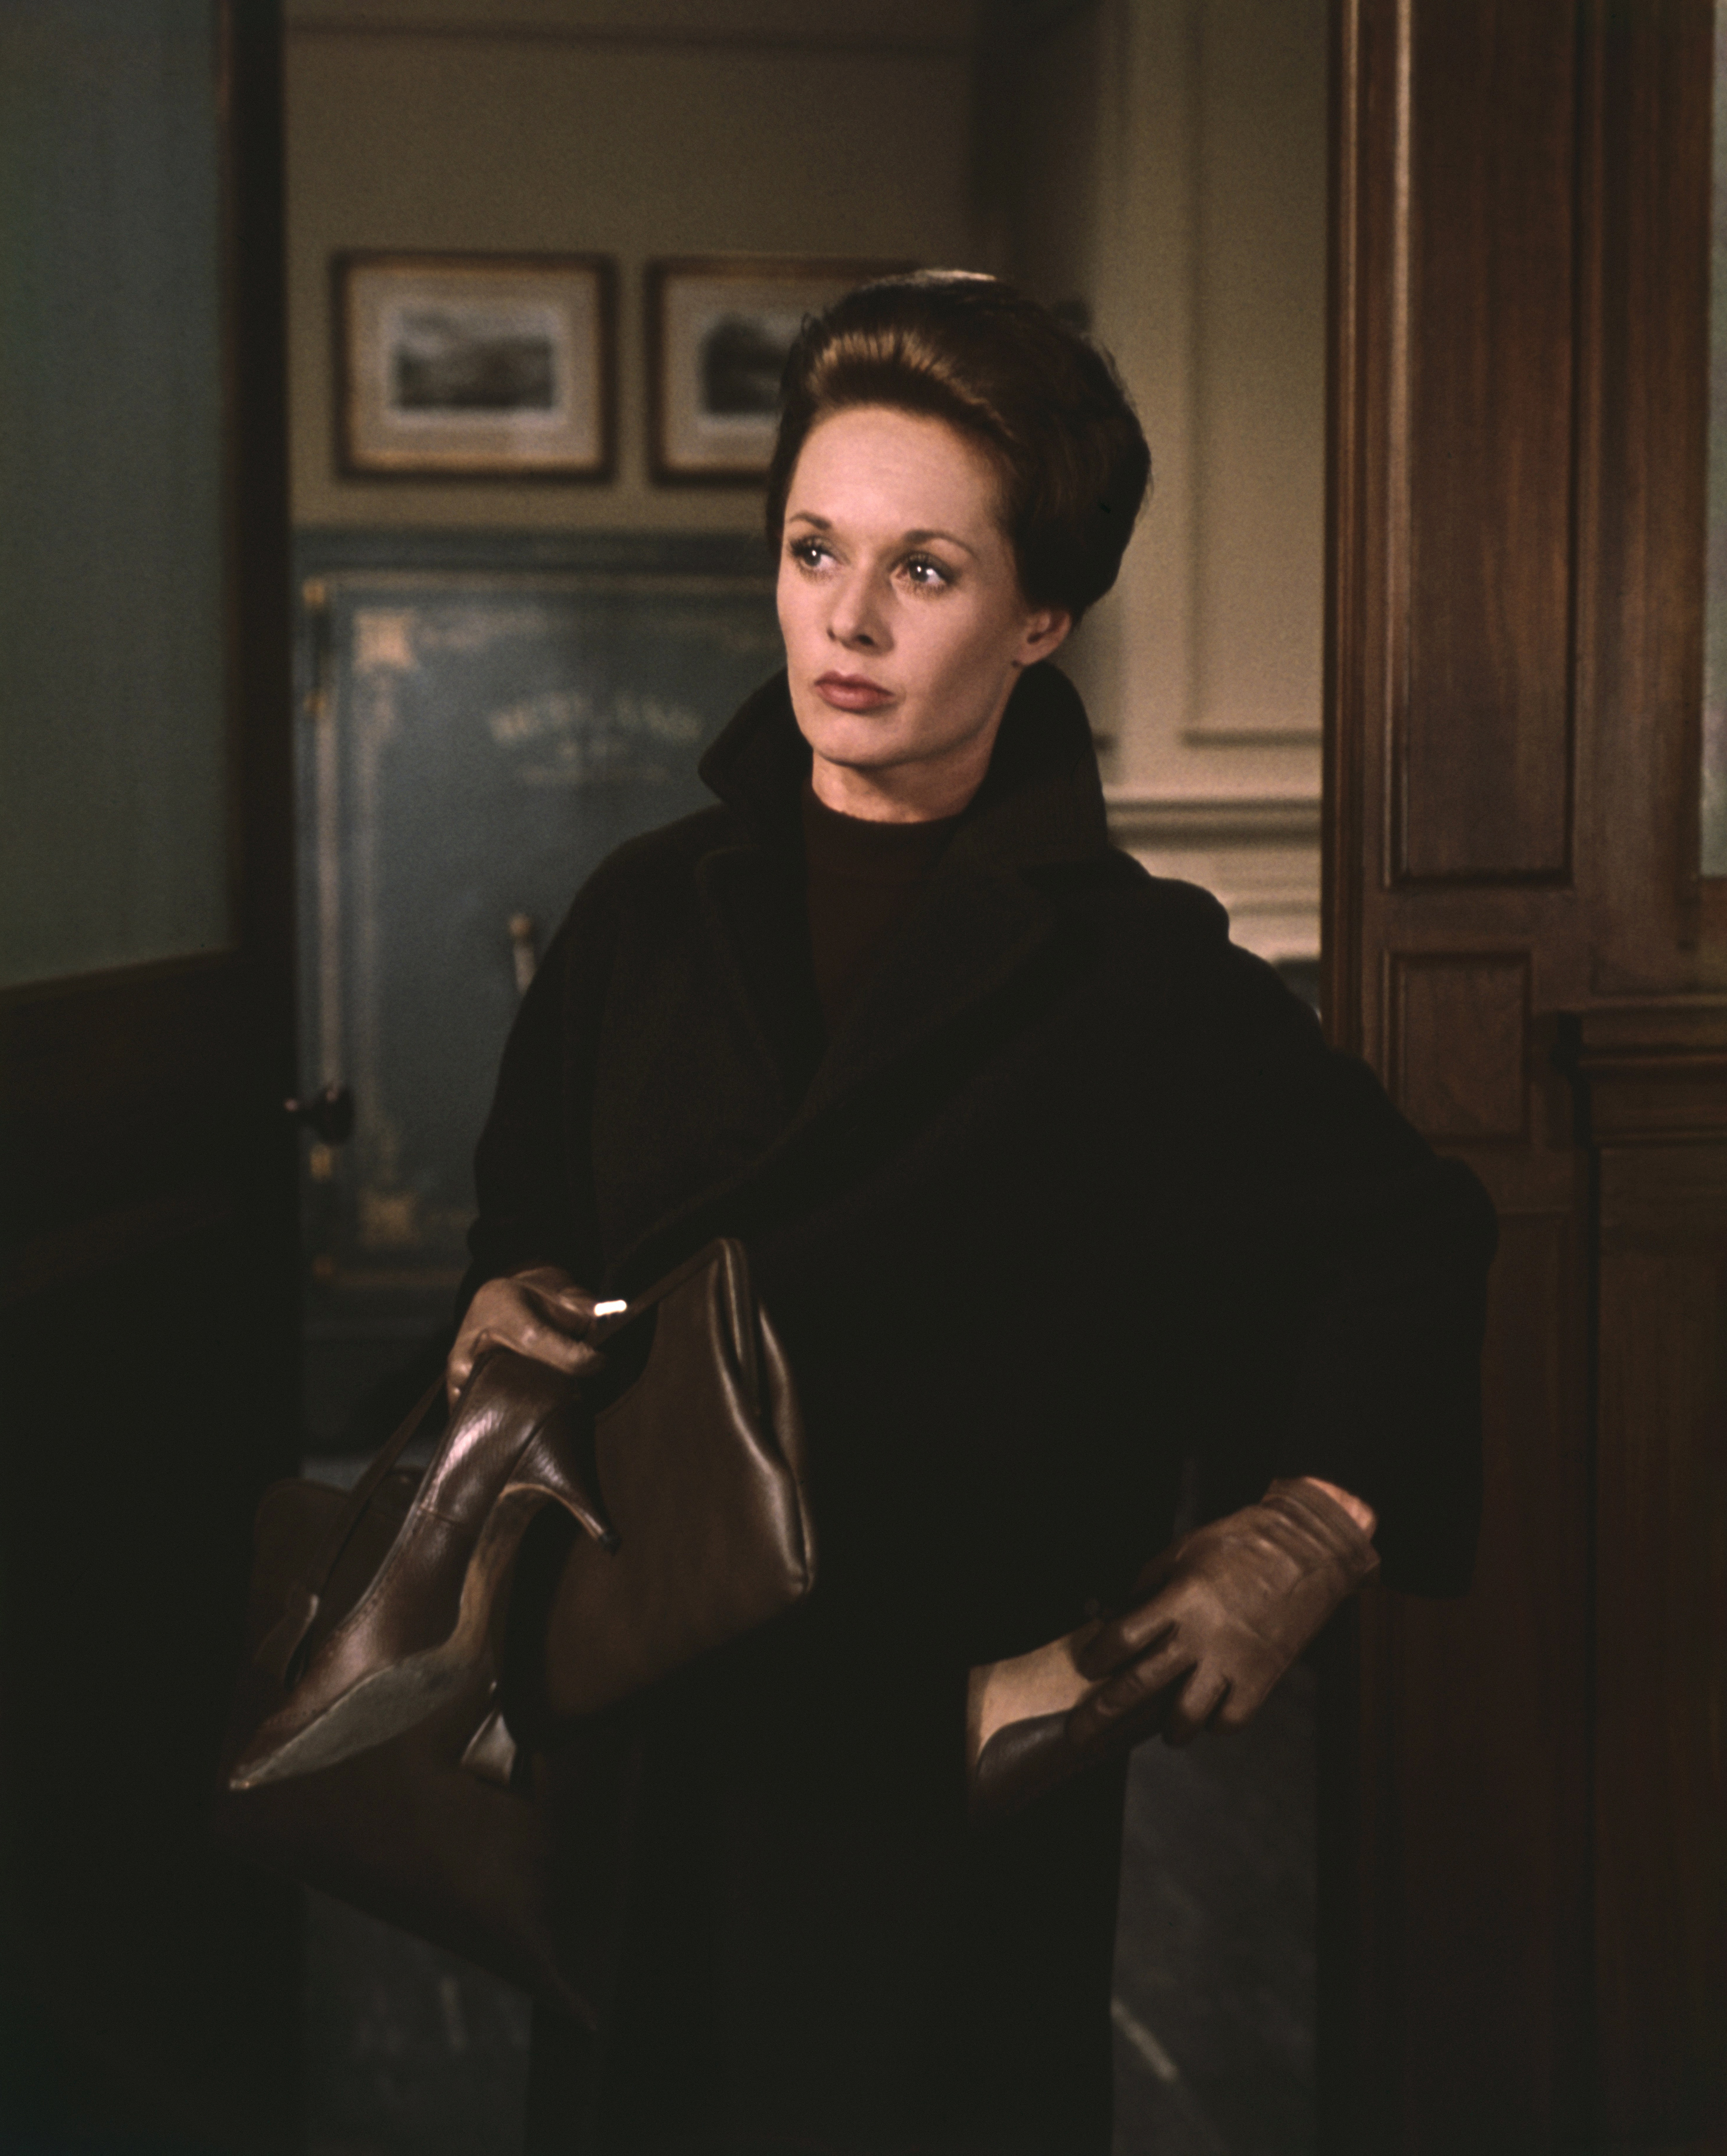 Tippi Hedren in a scene from "Marnie" in 1964. | Source: Getty Images